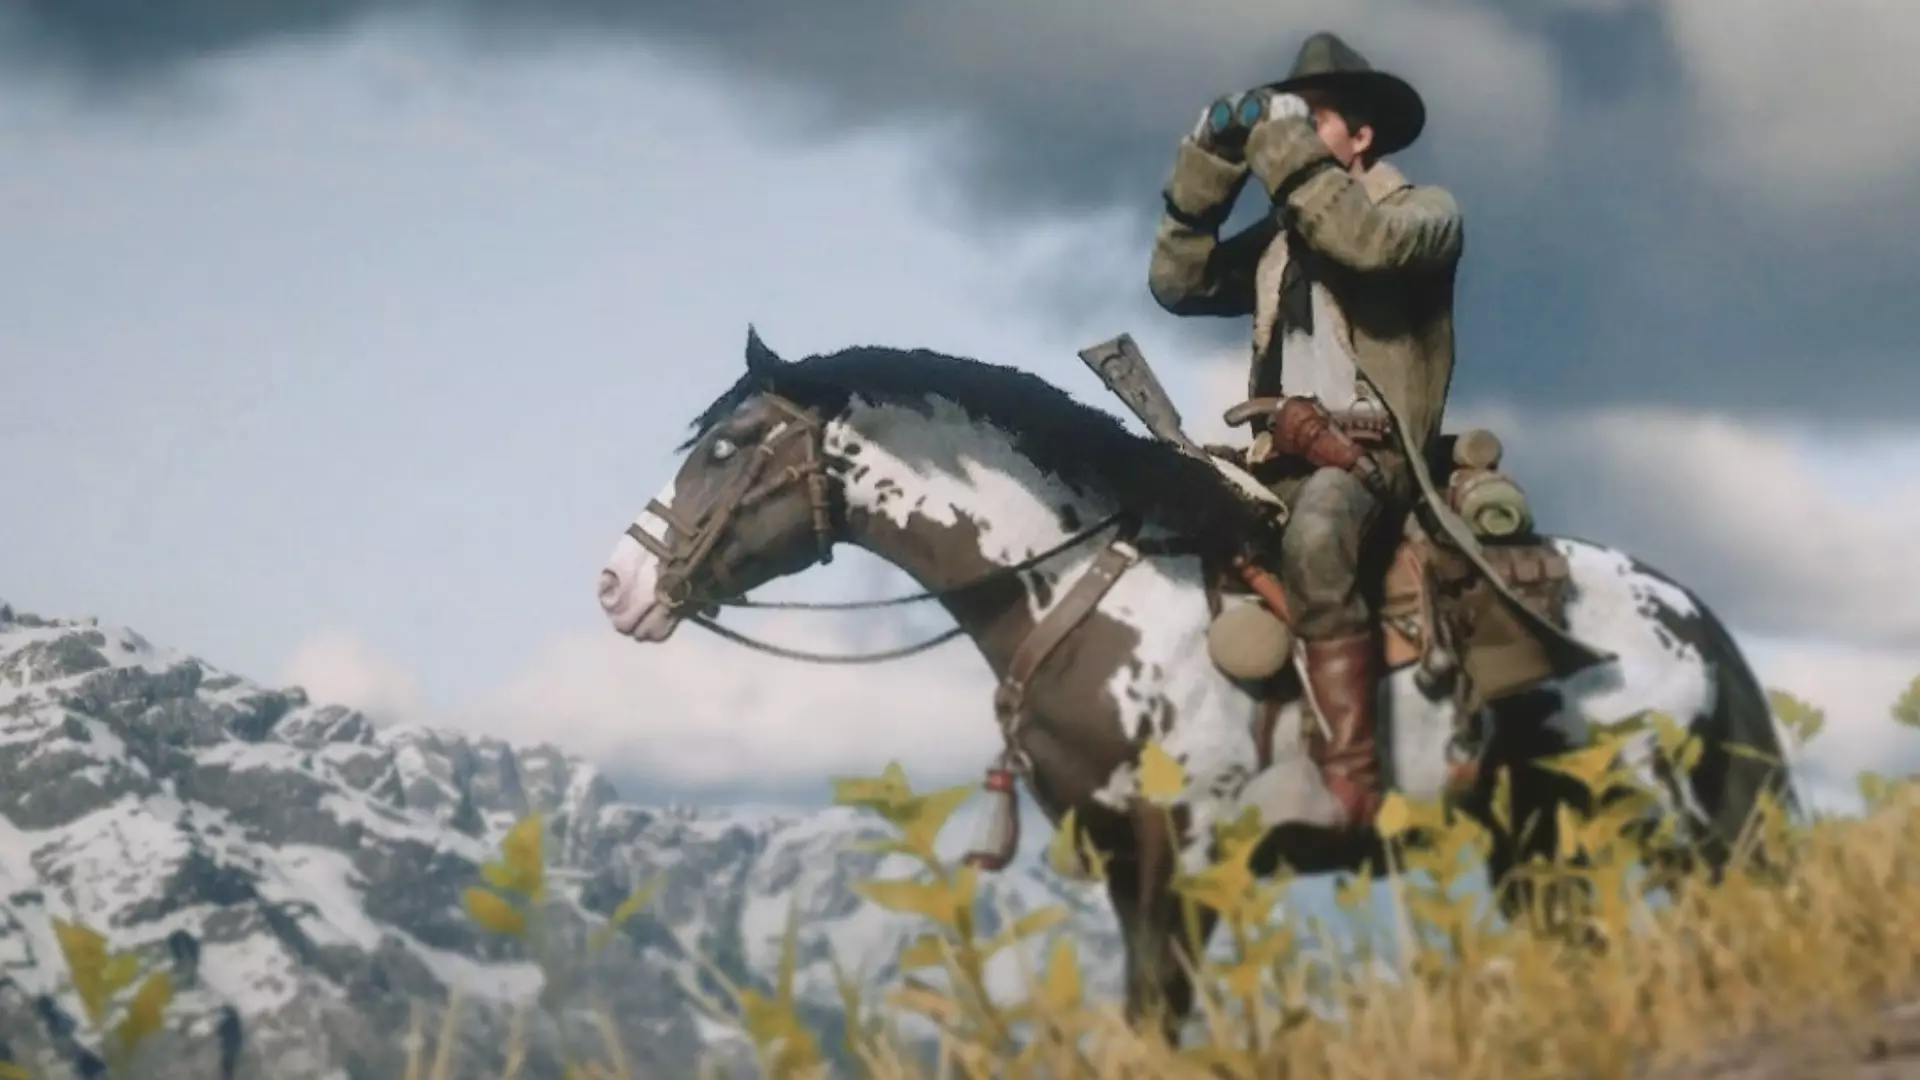 Red Dead Redemption 2 PC players get free stuff to make up for all the bugs